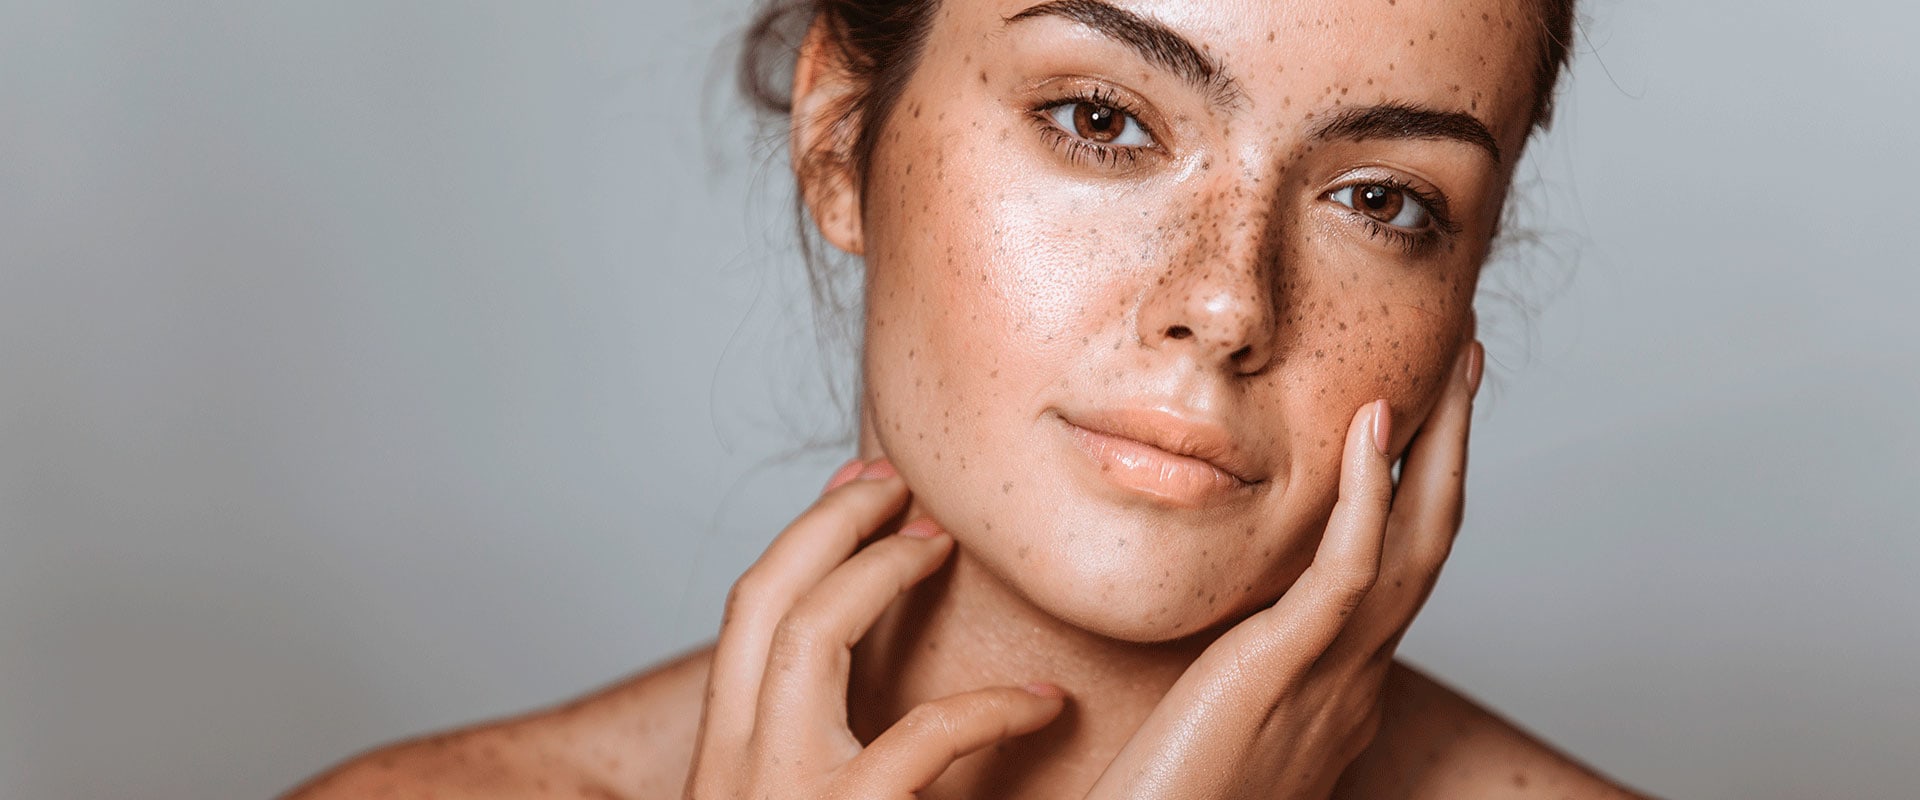 The Fascinating Science Behind Skin Pigmentation